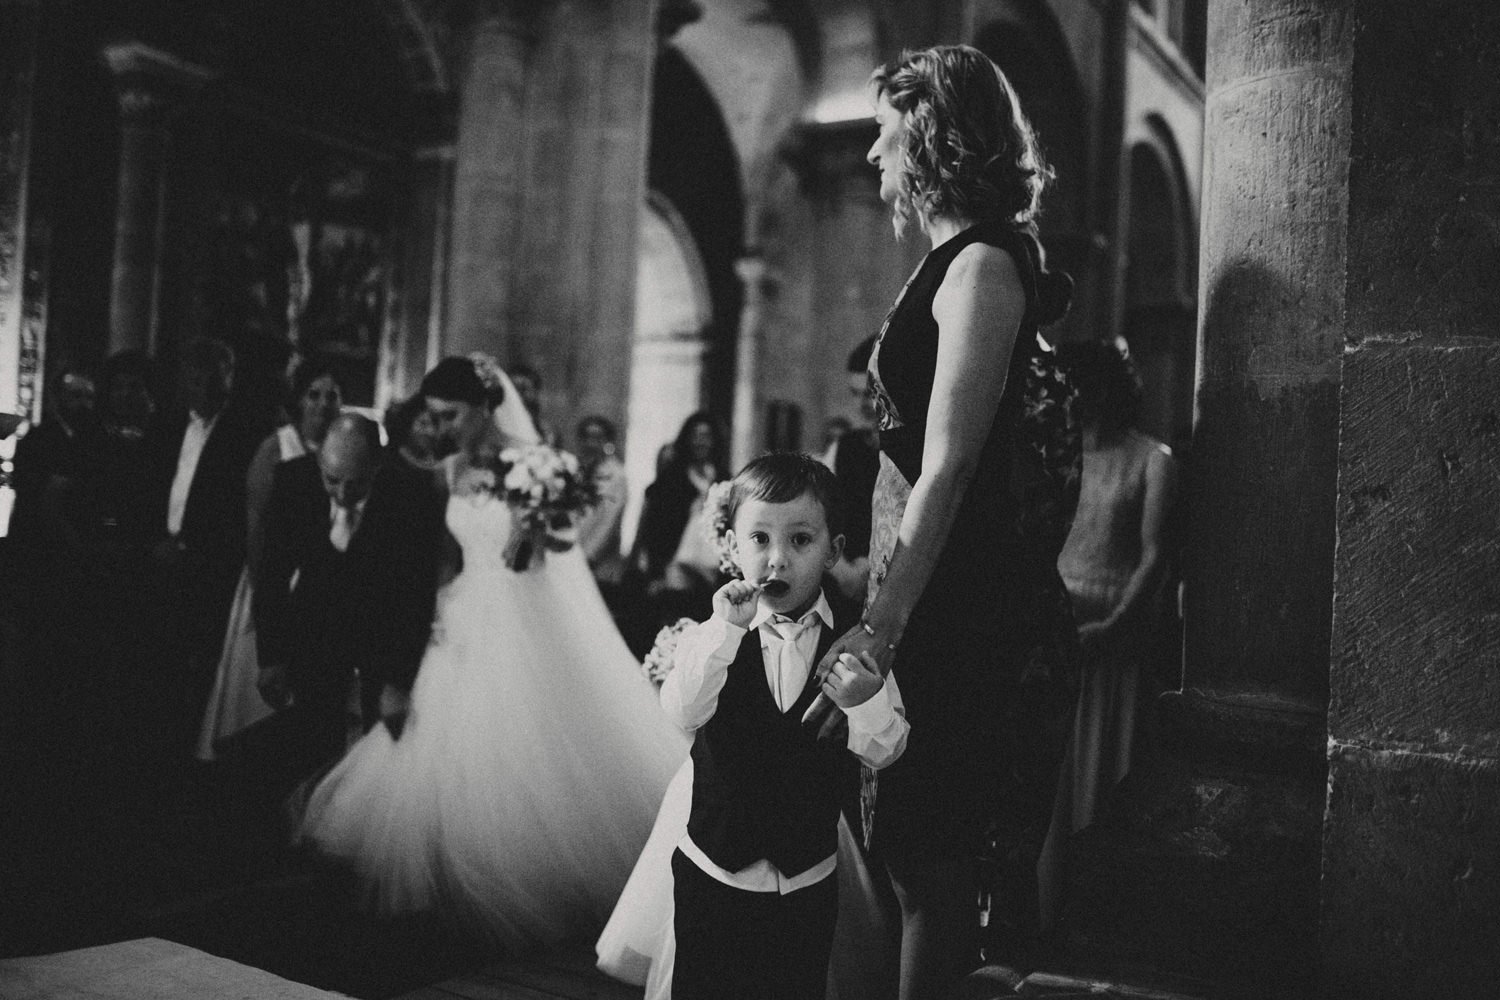 pageboy eating lollipop while bride and her father walks down the aisle in a wedding ceremony in coimbra portugal